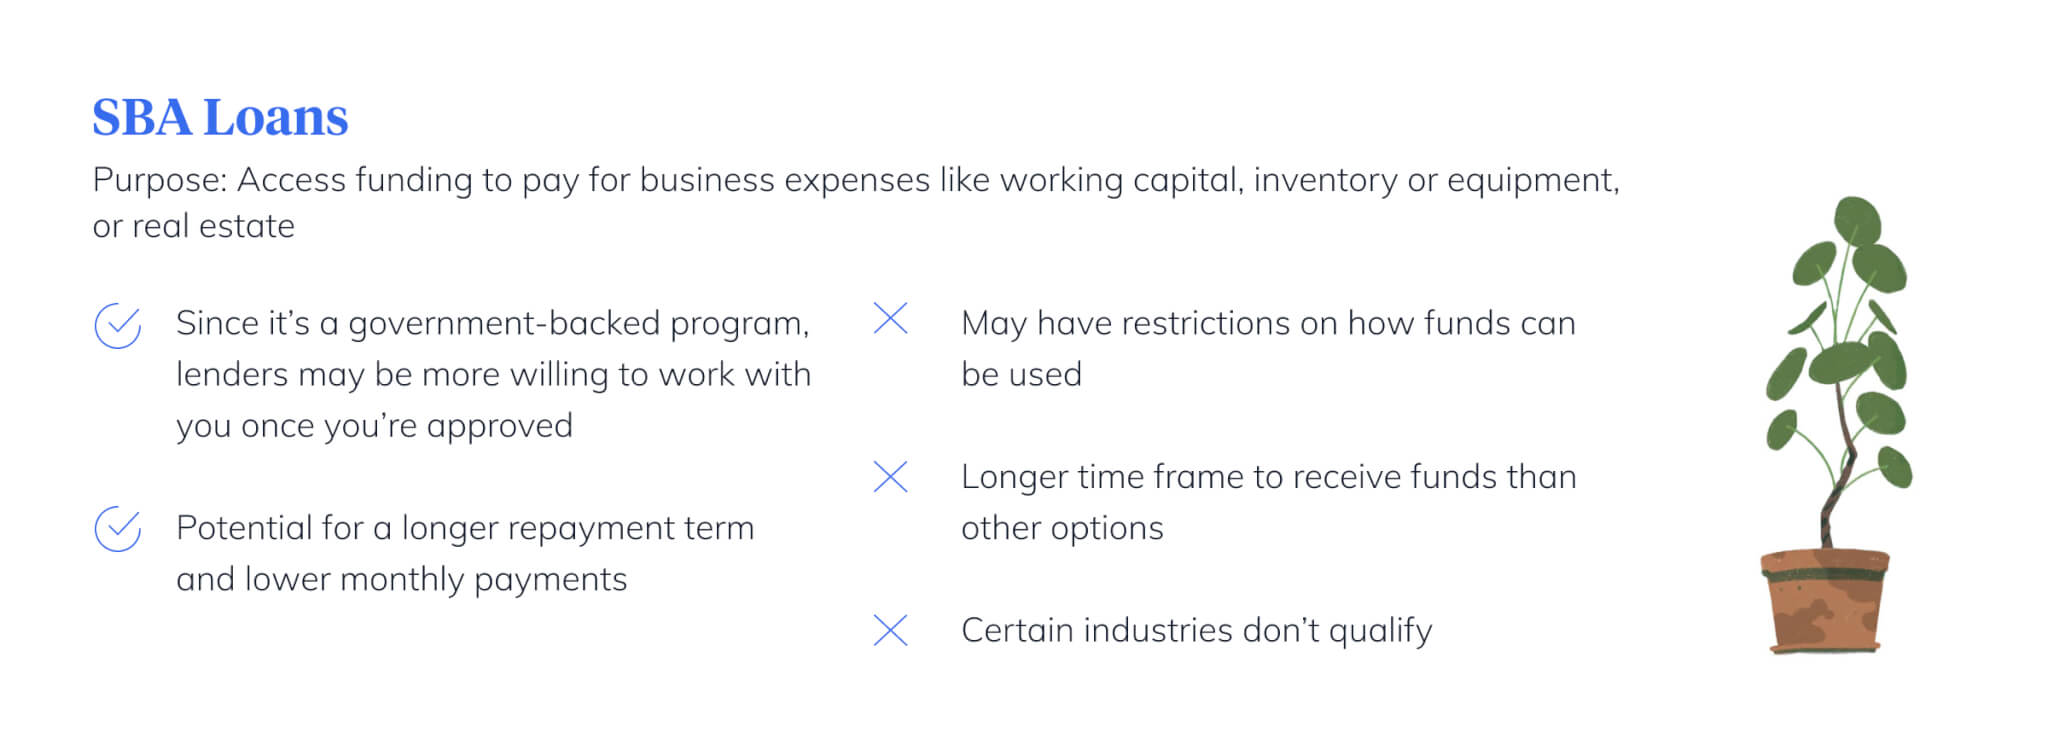 SBA loan pros and cons